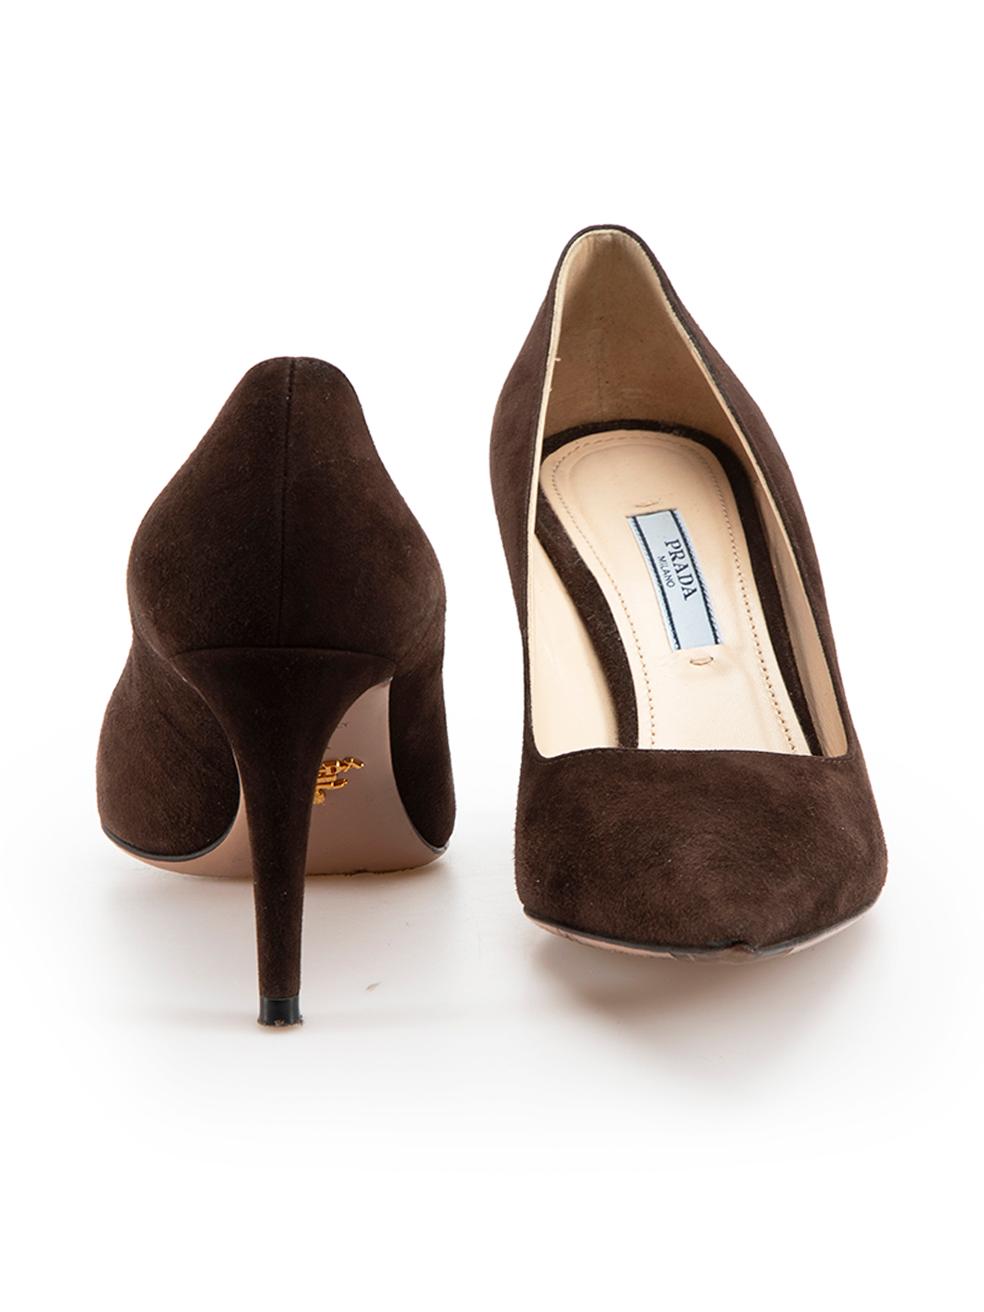 Prada Brown Suede Pointed Toe Pumps Size IT 36.5 In Excellent Condition For Sale In London, GB